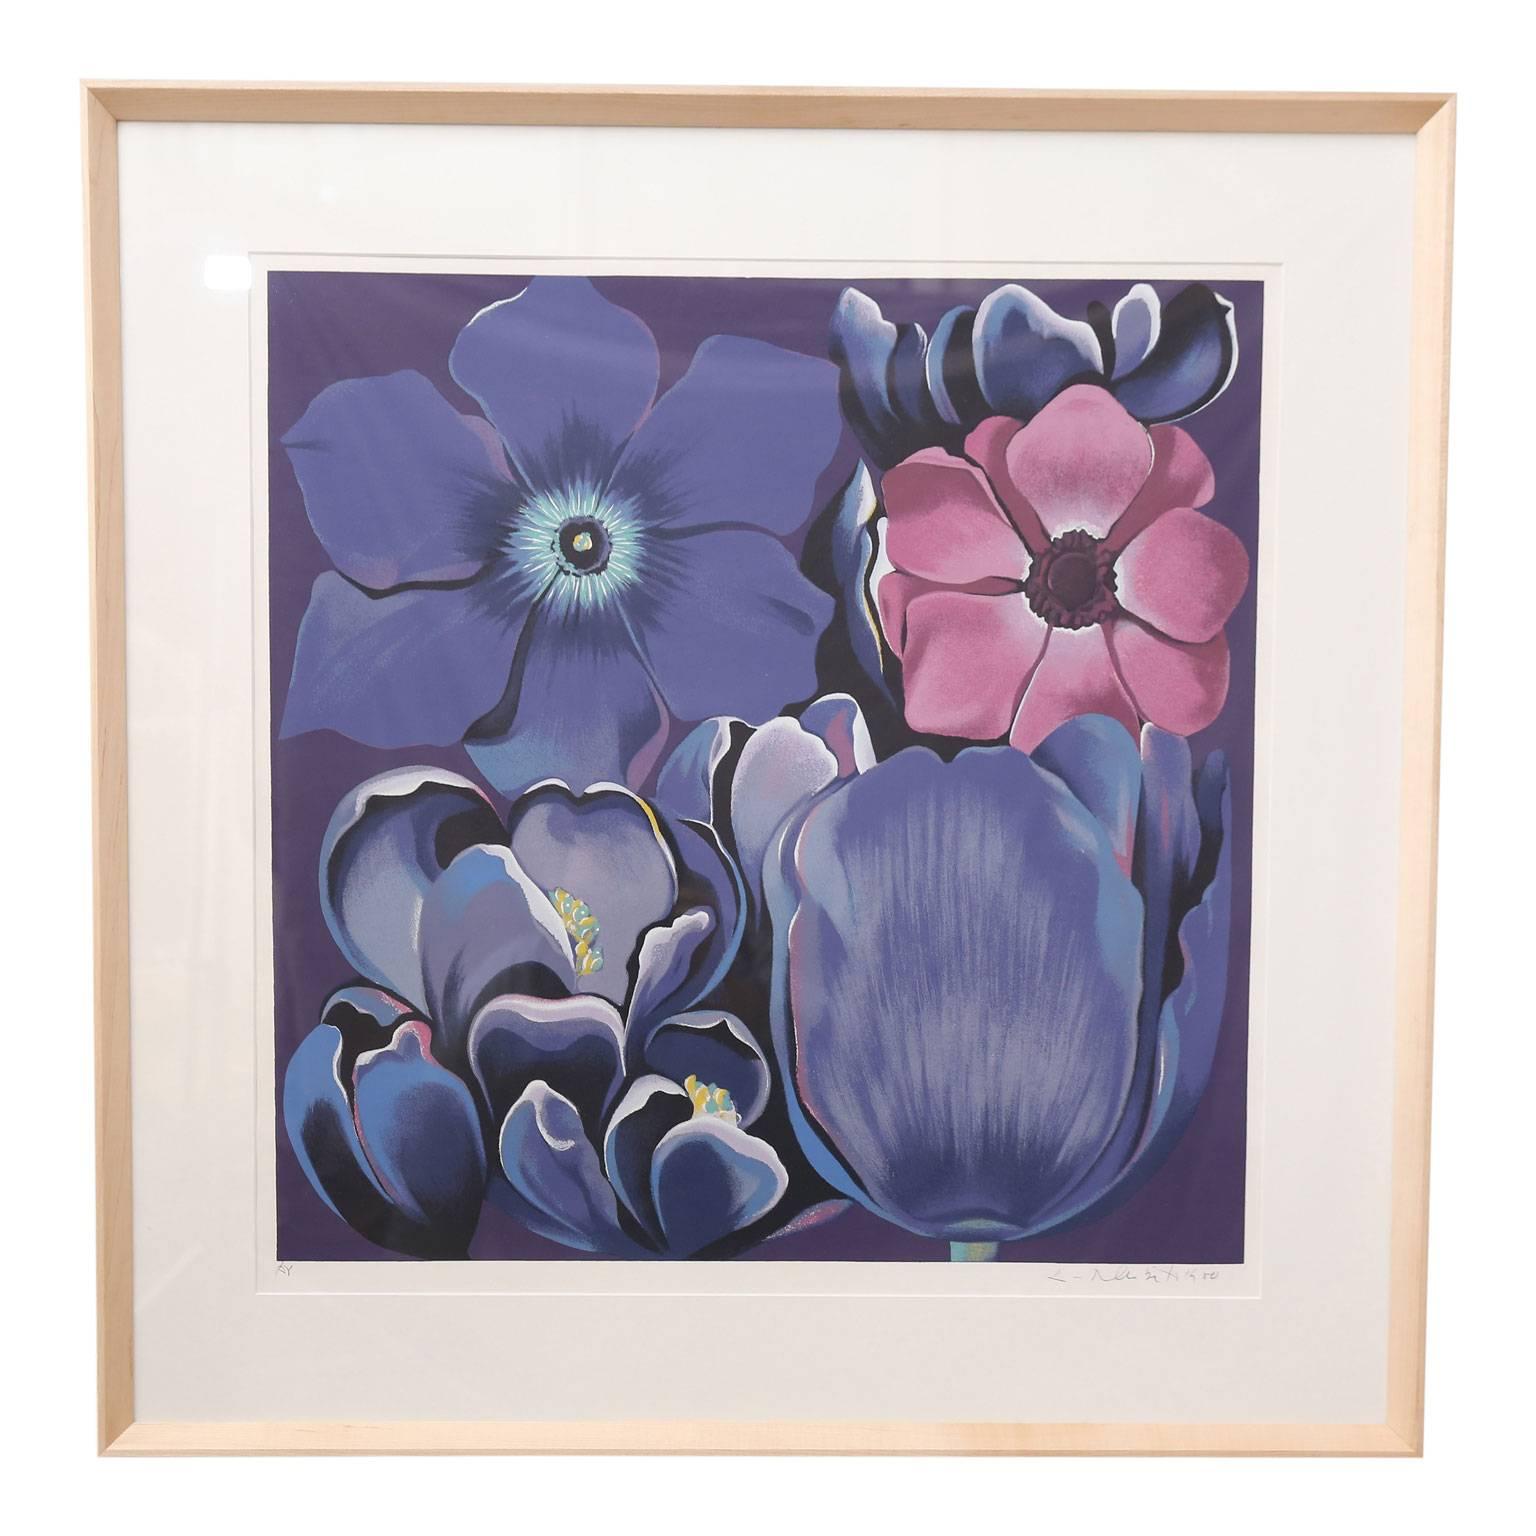 Framed Signed and Numbered Serigraph "Violet Monochrome" by Lowell Nesbitt